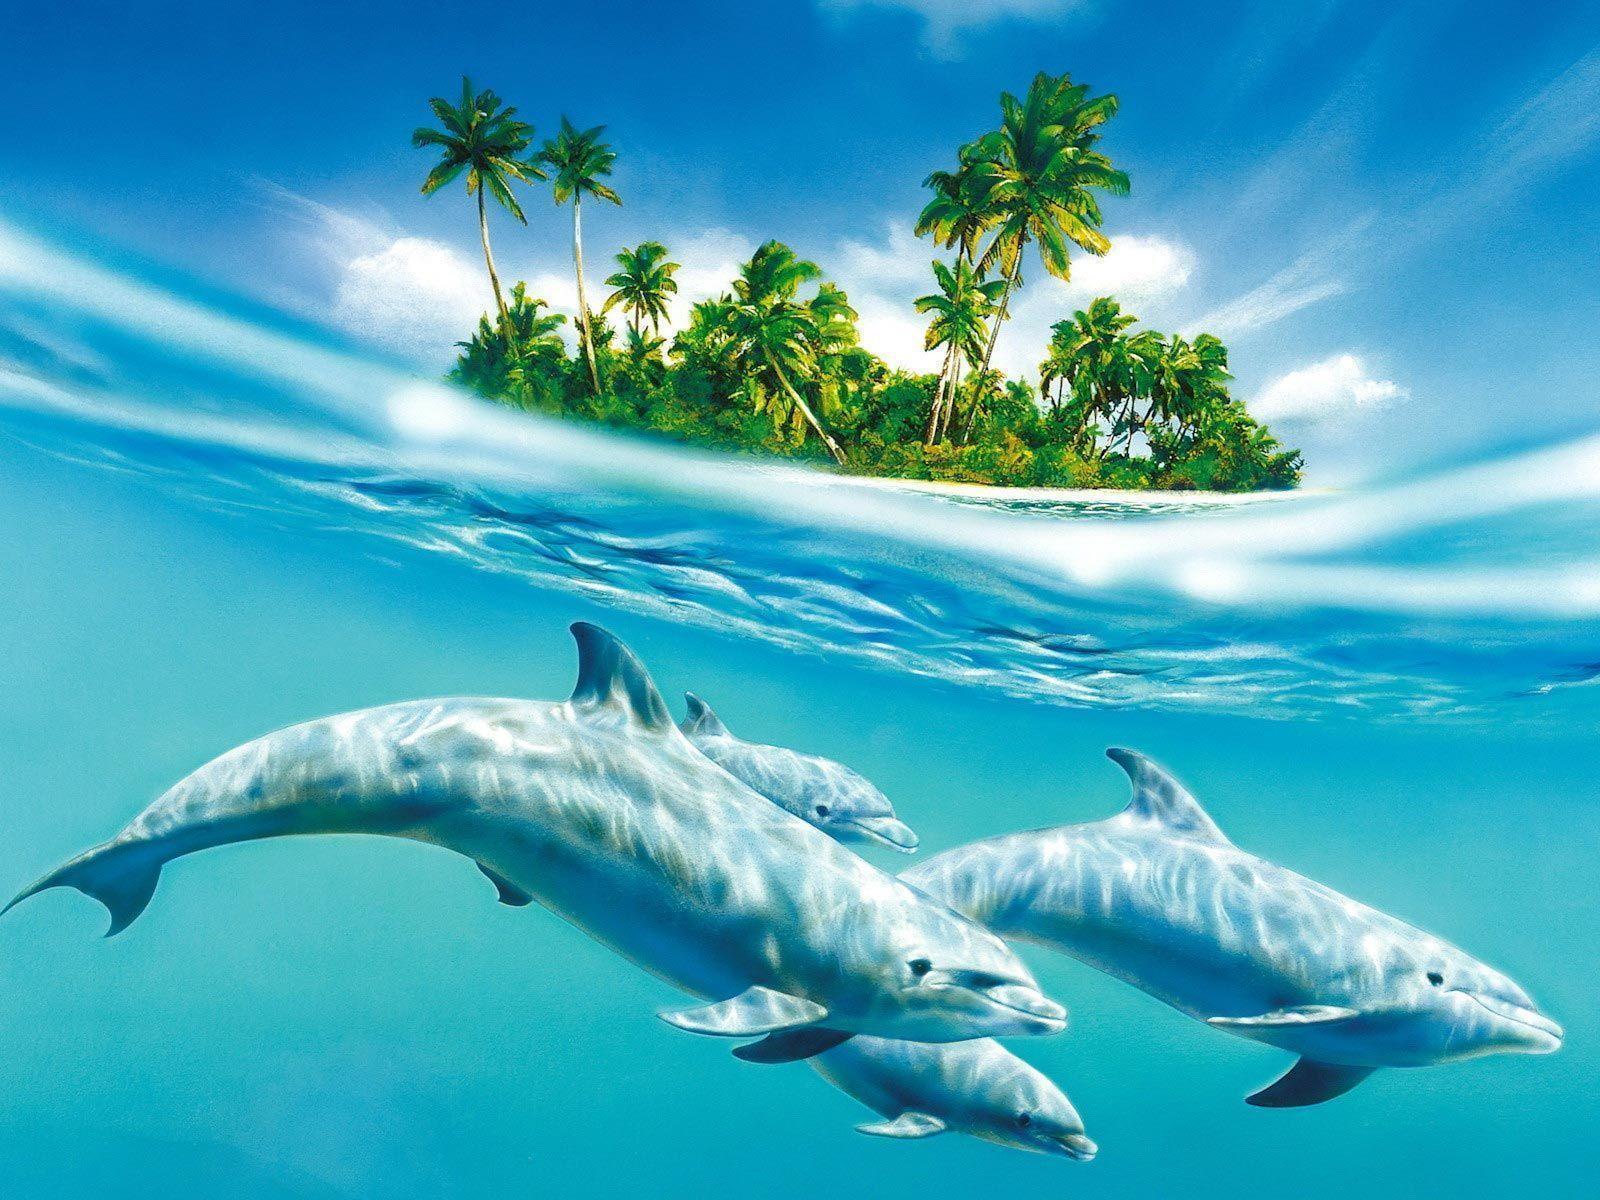 Dolphins Wallpaper 14684 1600x1200 px